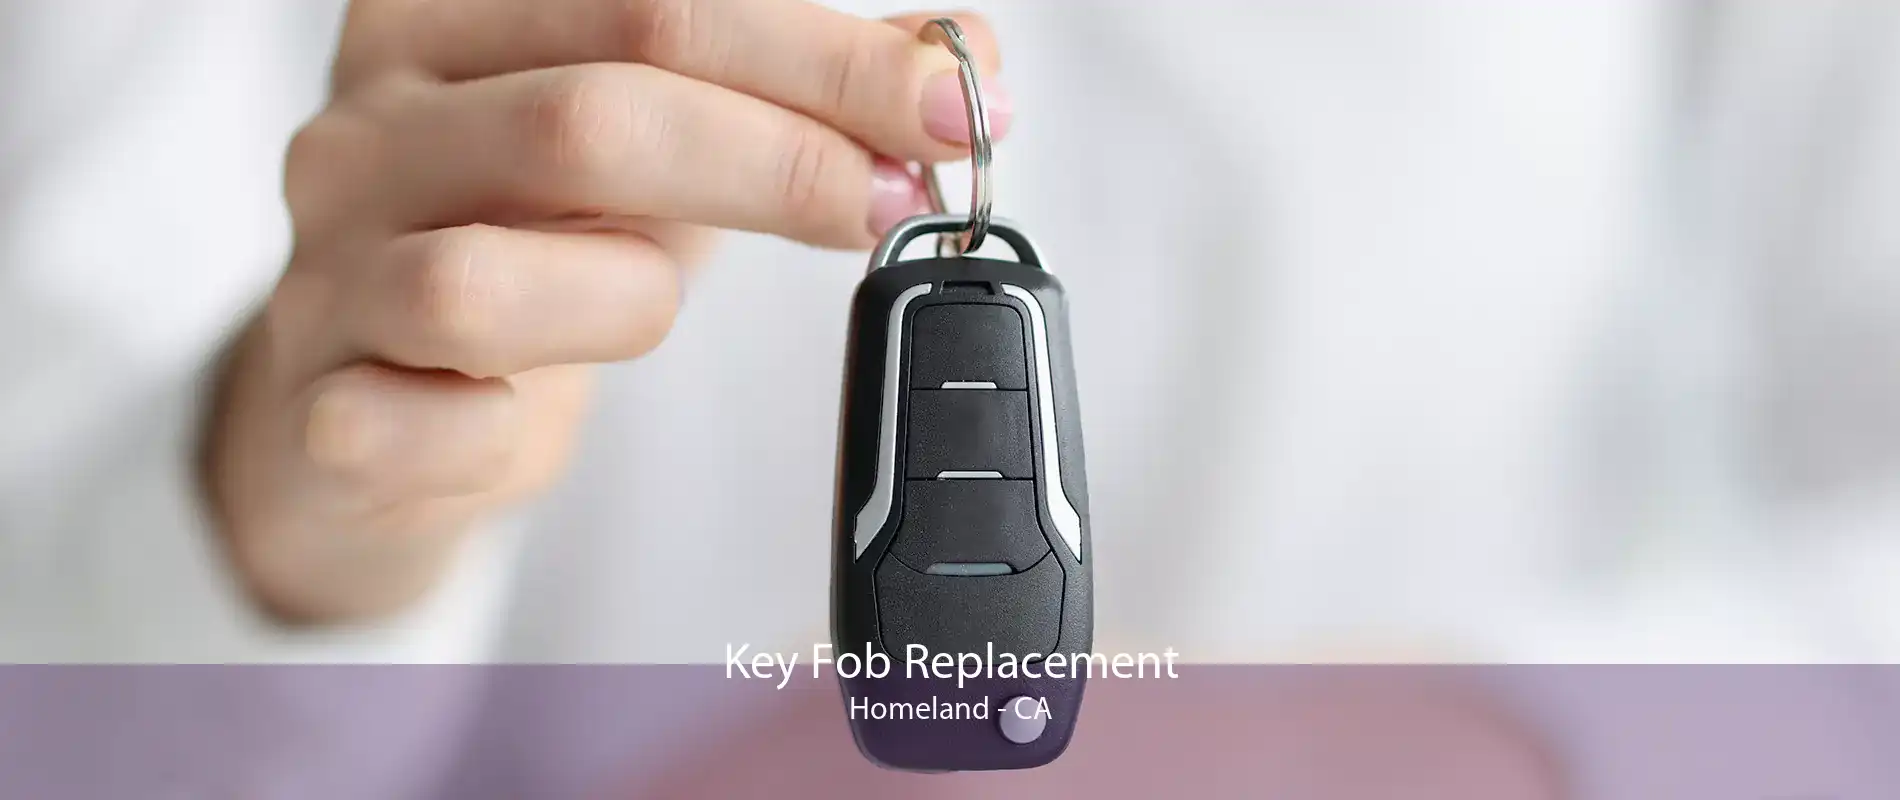 Key Fob Replacement Homeland - CA